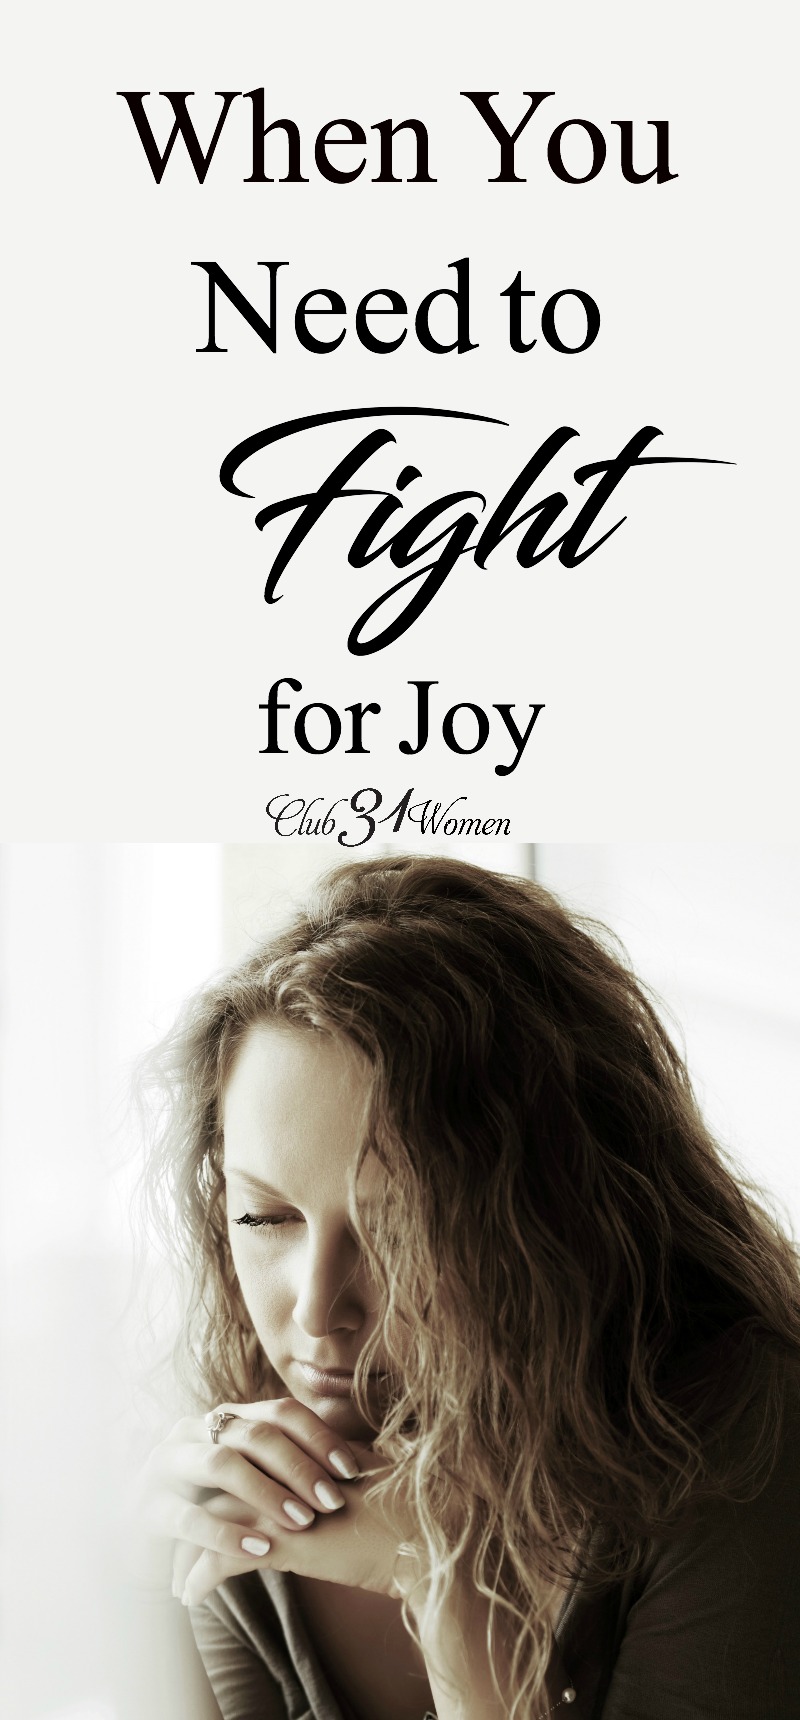 Do you struggle to find joy? Why is it so hard? Maybe you're someone who needs to fight for joy. What does that look like? via @Club31Women